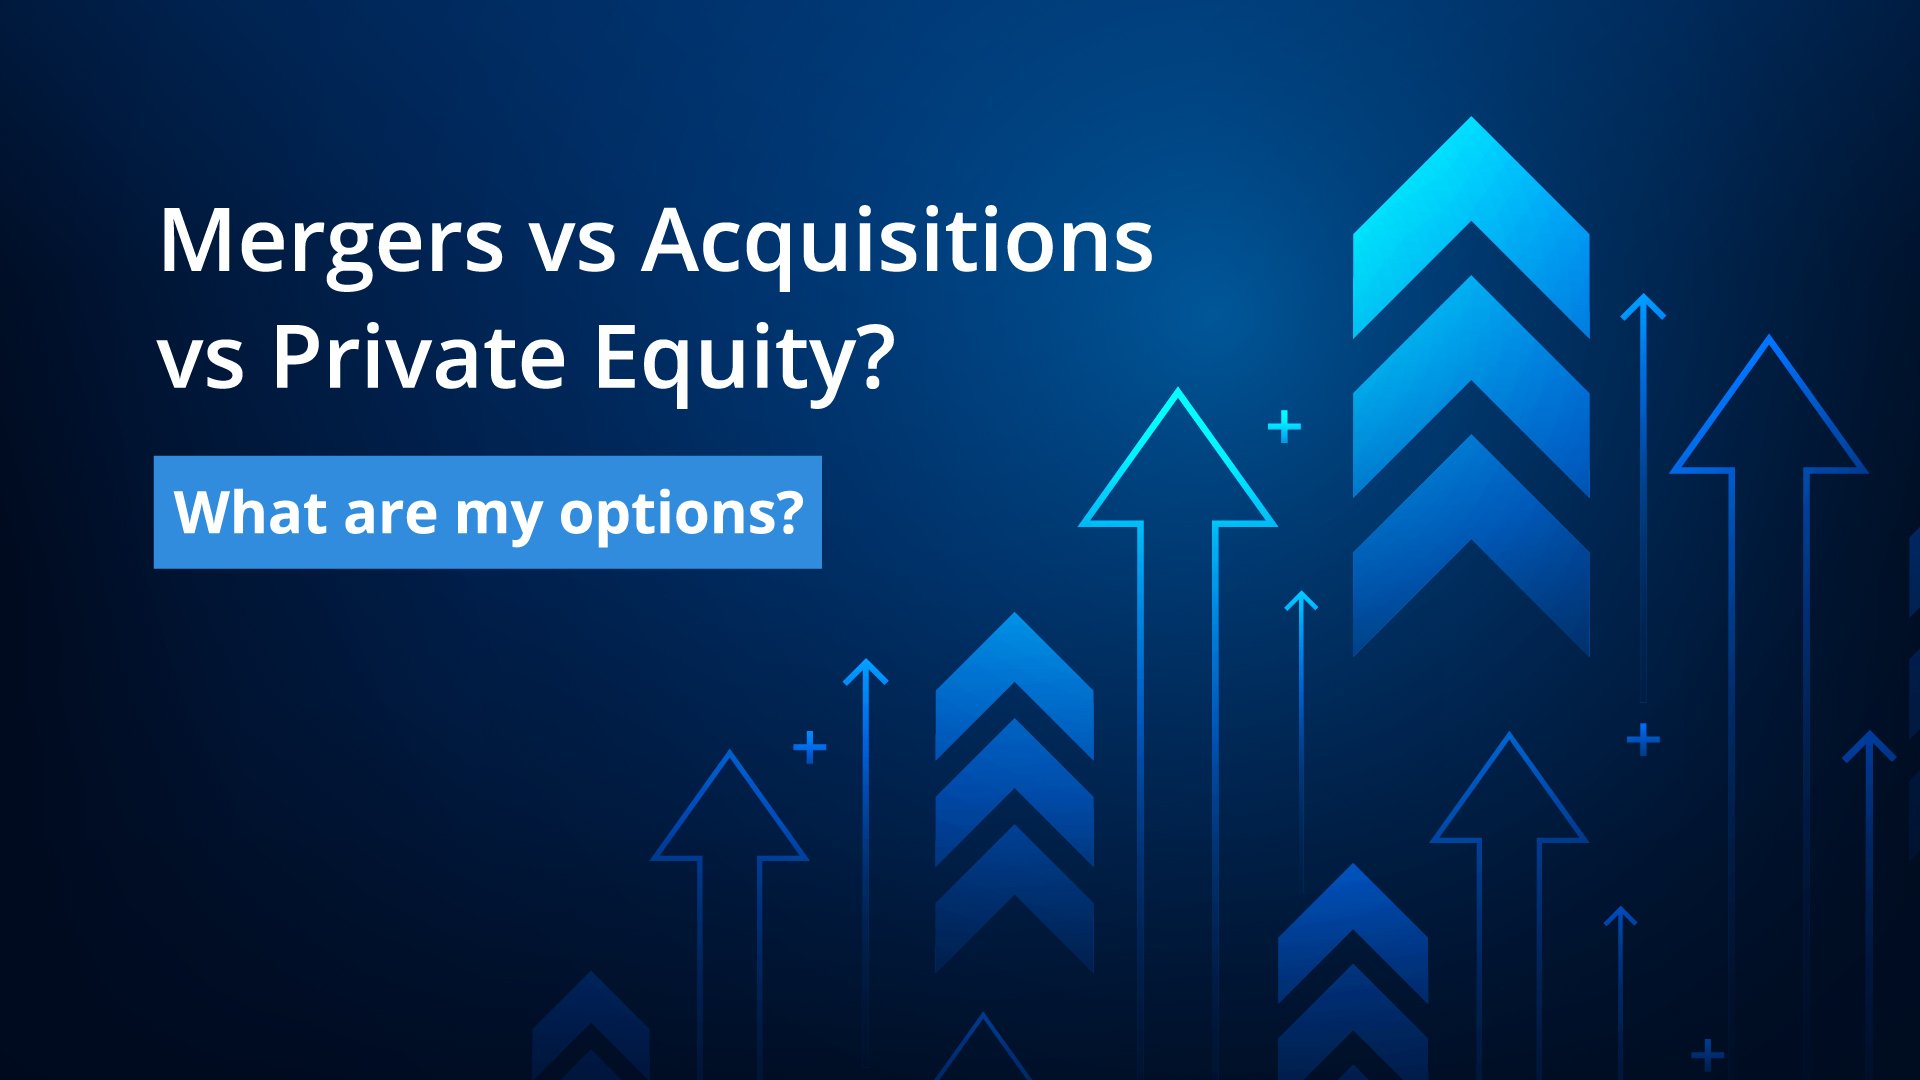 Mergers vs Acquisitions vs Private Equity?